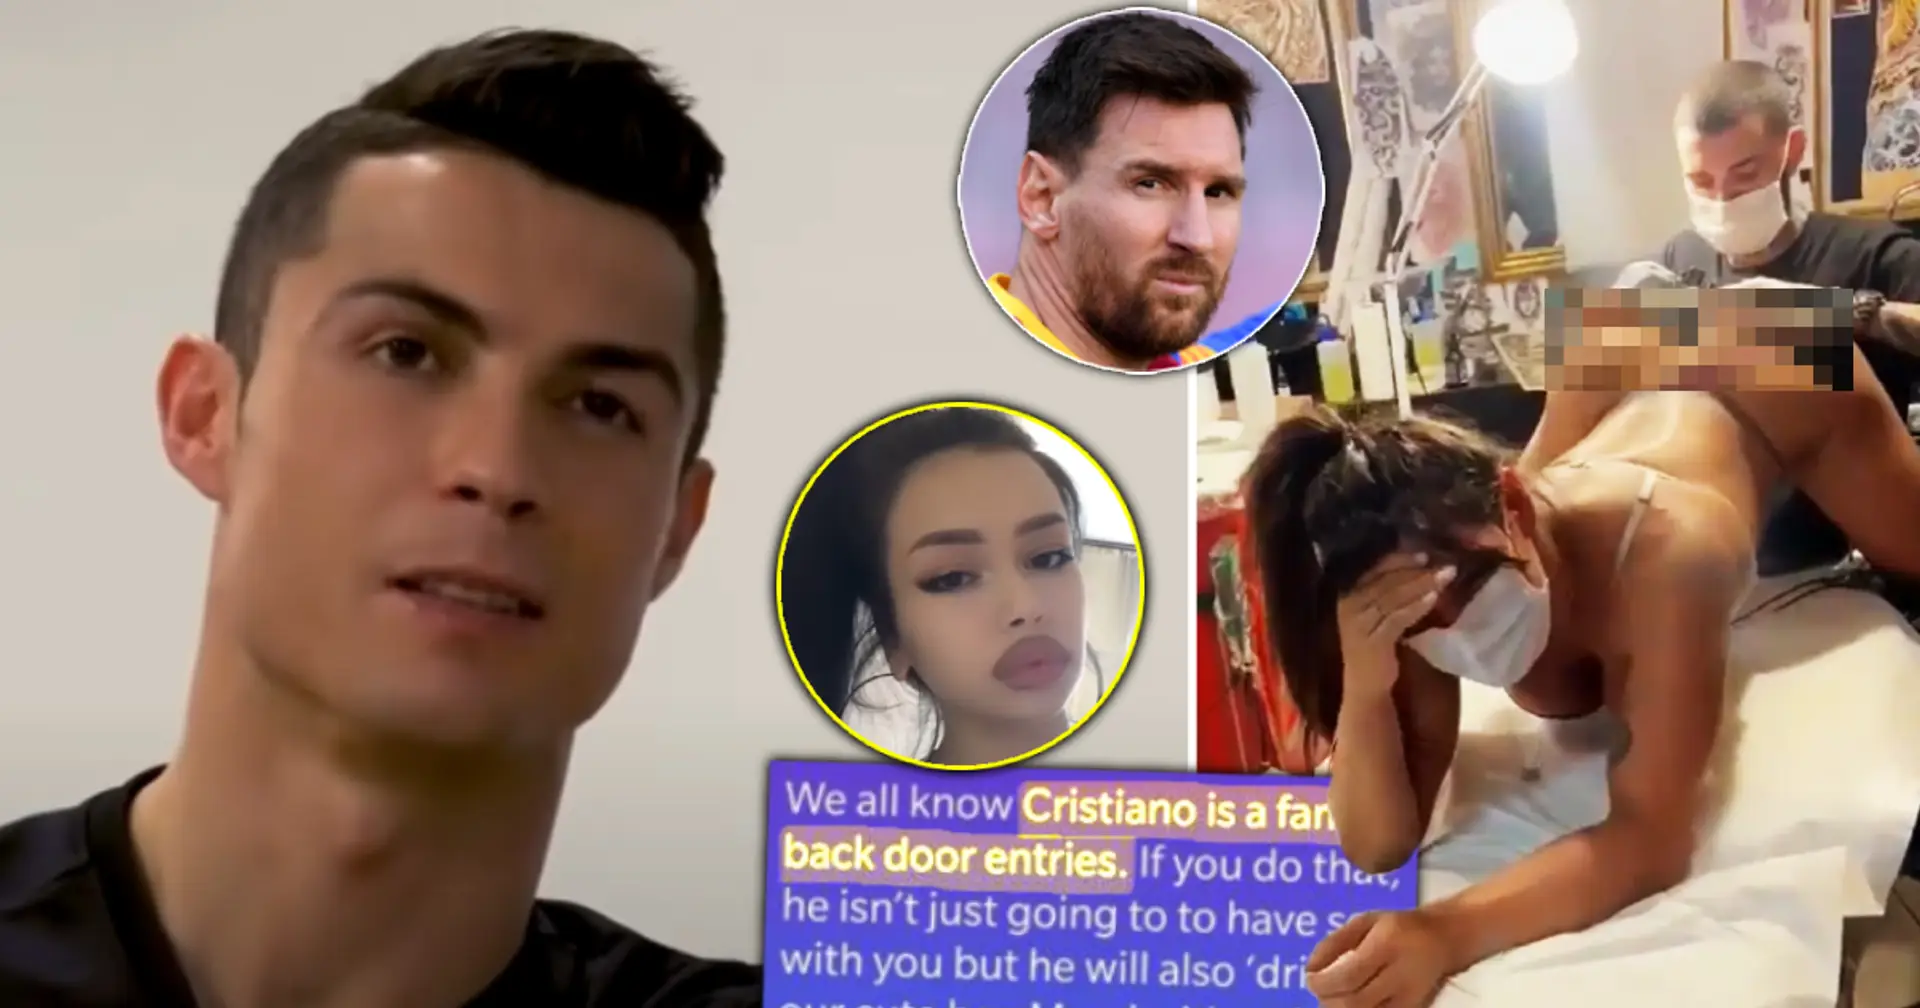 'Don't do an*l with Cristiano, he wants Ballon d'Or revenge': I messaged MissBumBum on Messi tattoo